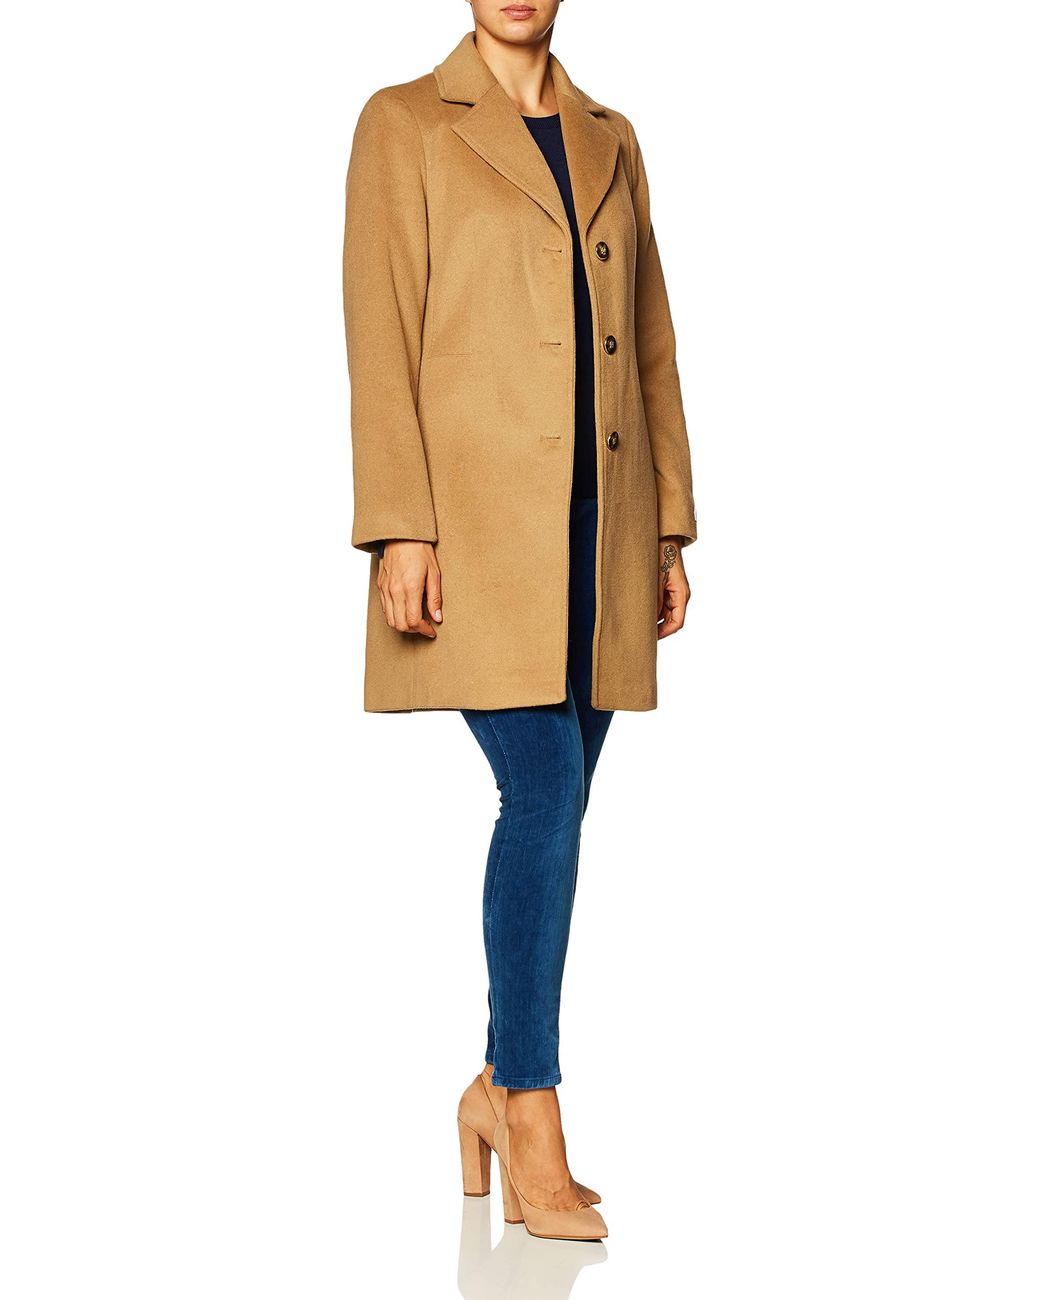 Calvin Klein Classic Cashmere Wool Blend Coat in Camel (Natural) - Save 52%  | Lyst